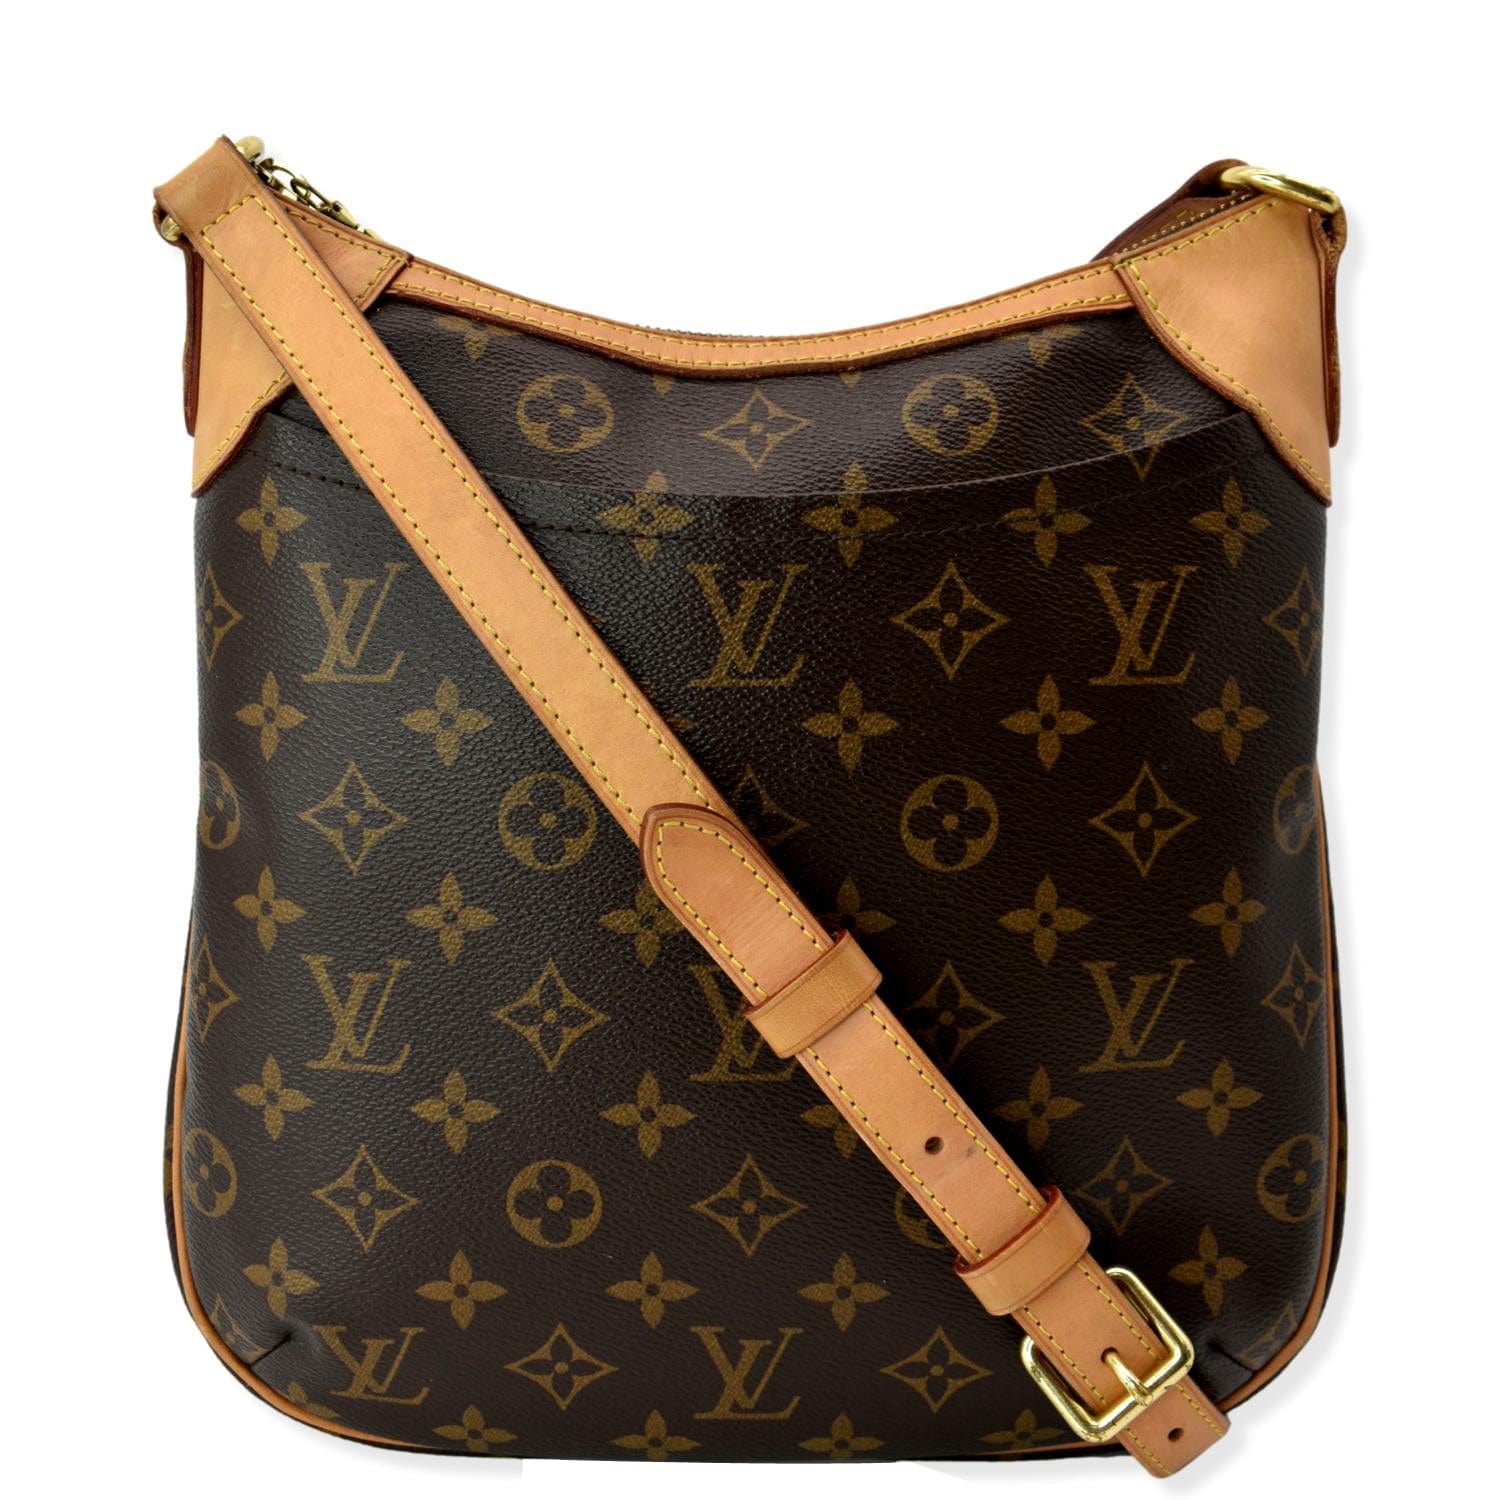 Authentic Louis Vuitton Odeon PM Crossbody for Sale in Goodyear